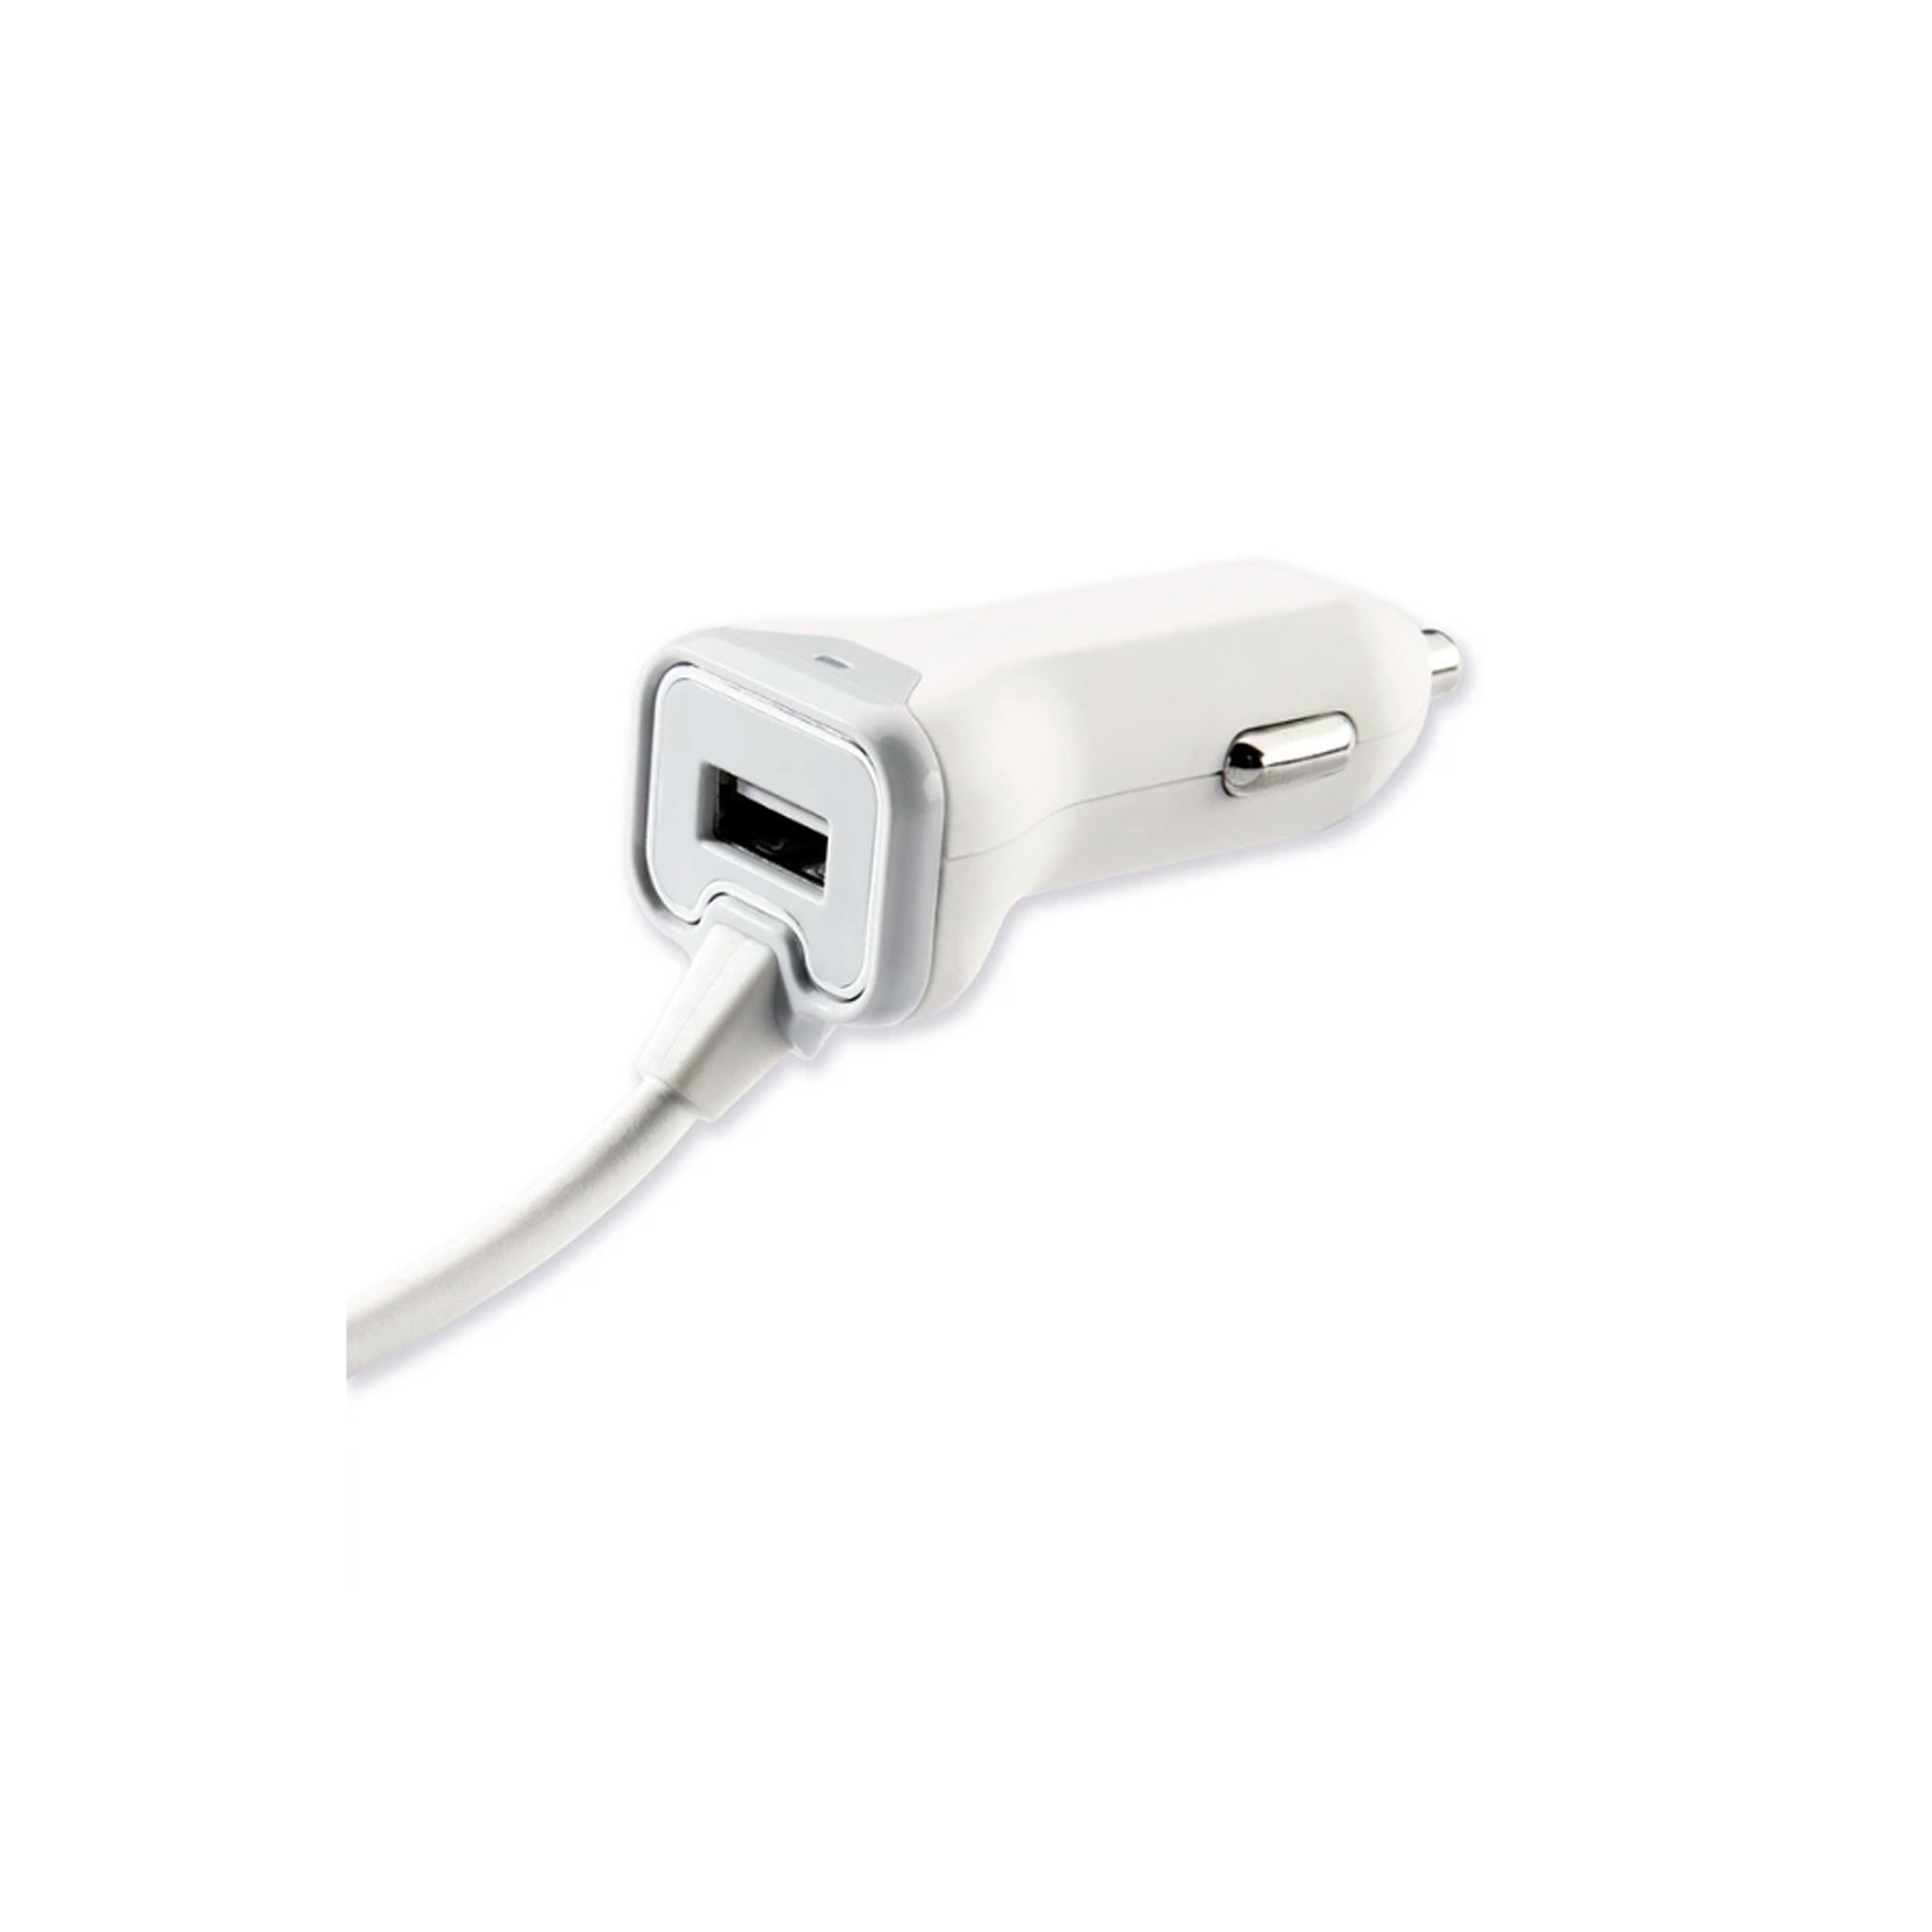 Qmadix - Car Charger 3.4a For Apple Lightning Devices With Additional Port - White